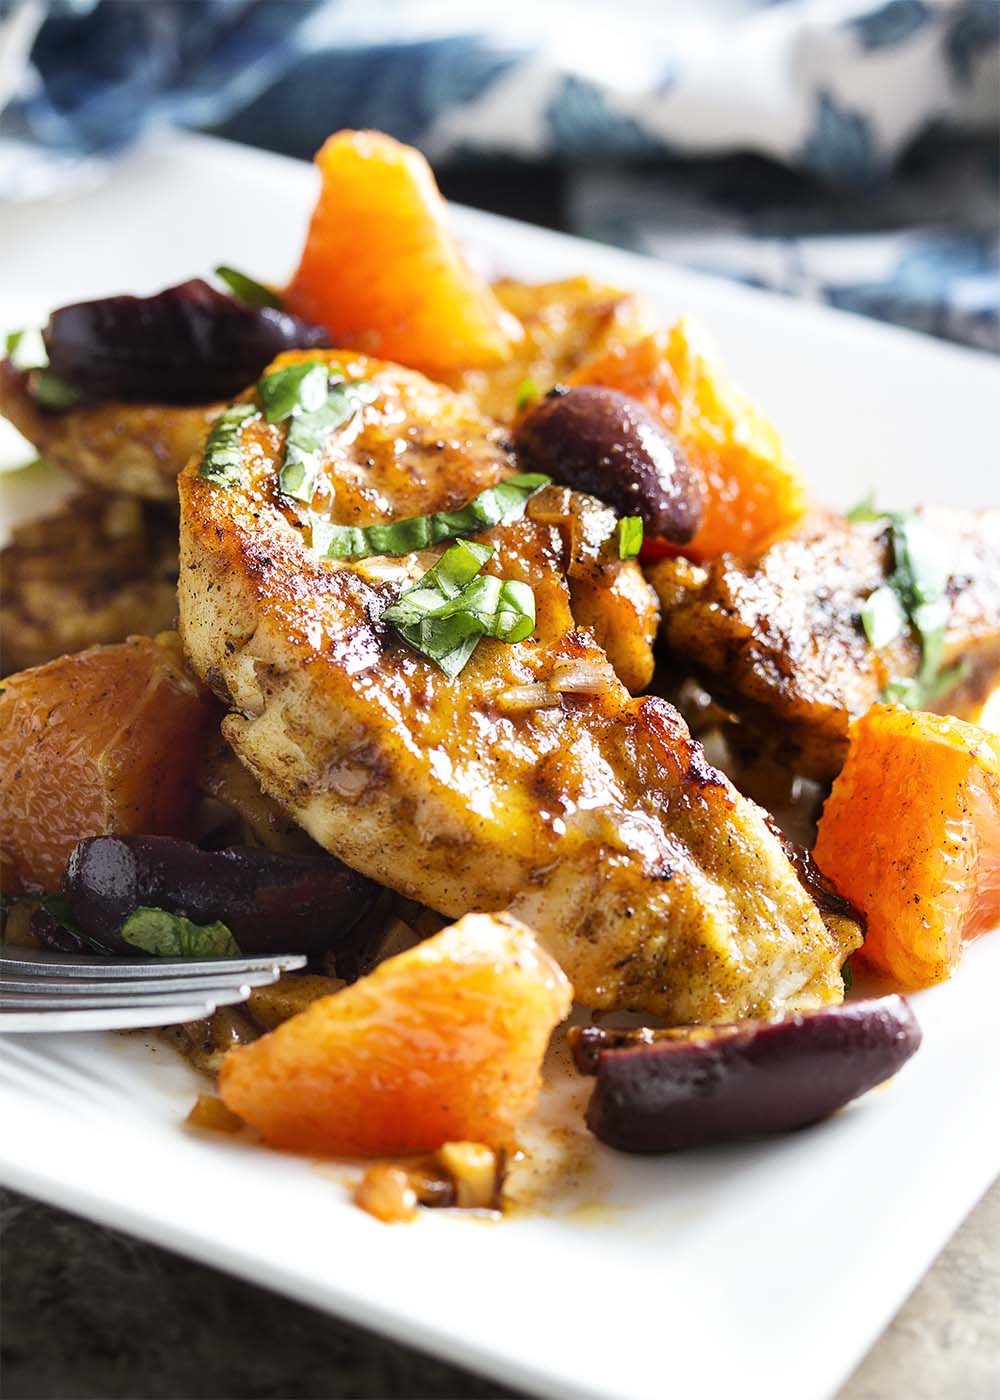 Easy and quick! This Mediterranean chicken skillet combines tender chicken breast with olives and oranges for a spicy/sweet dinner recipe. Great with roasted potatoes or over rice. | justalittlebitofbacon.com